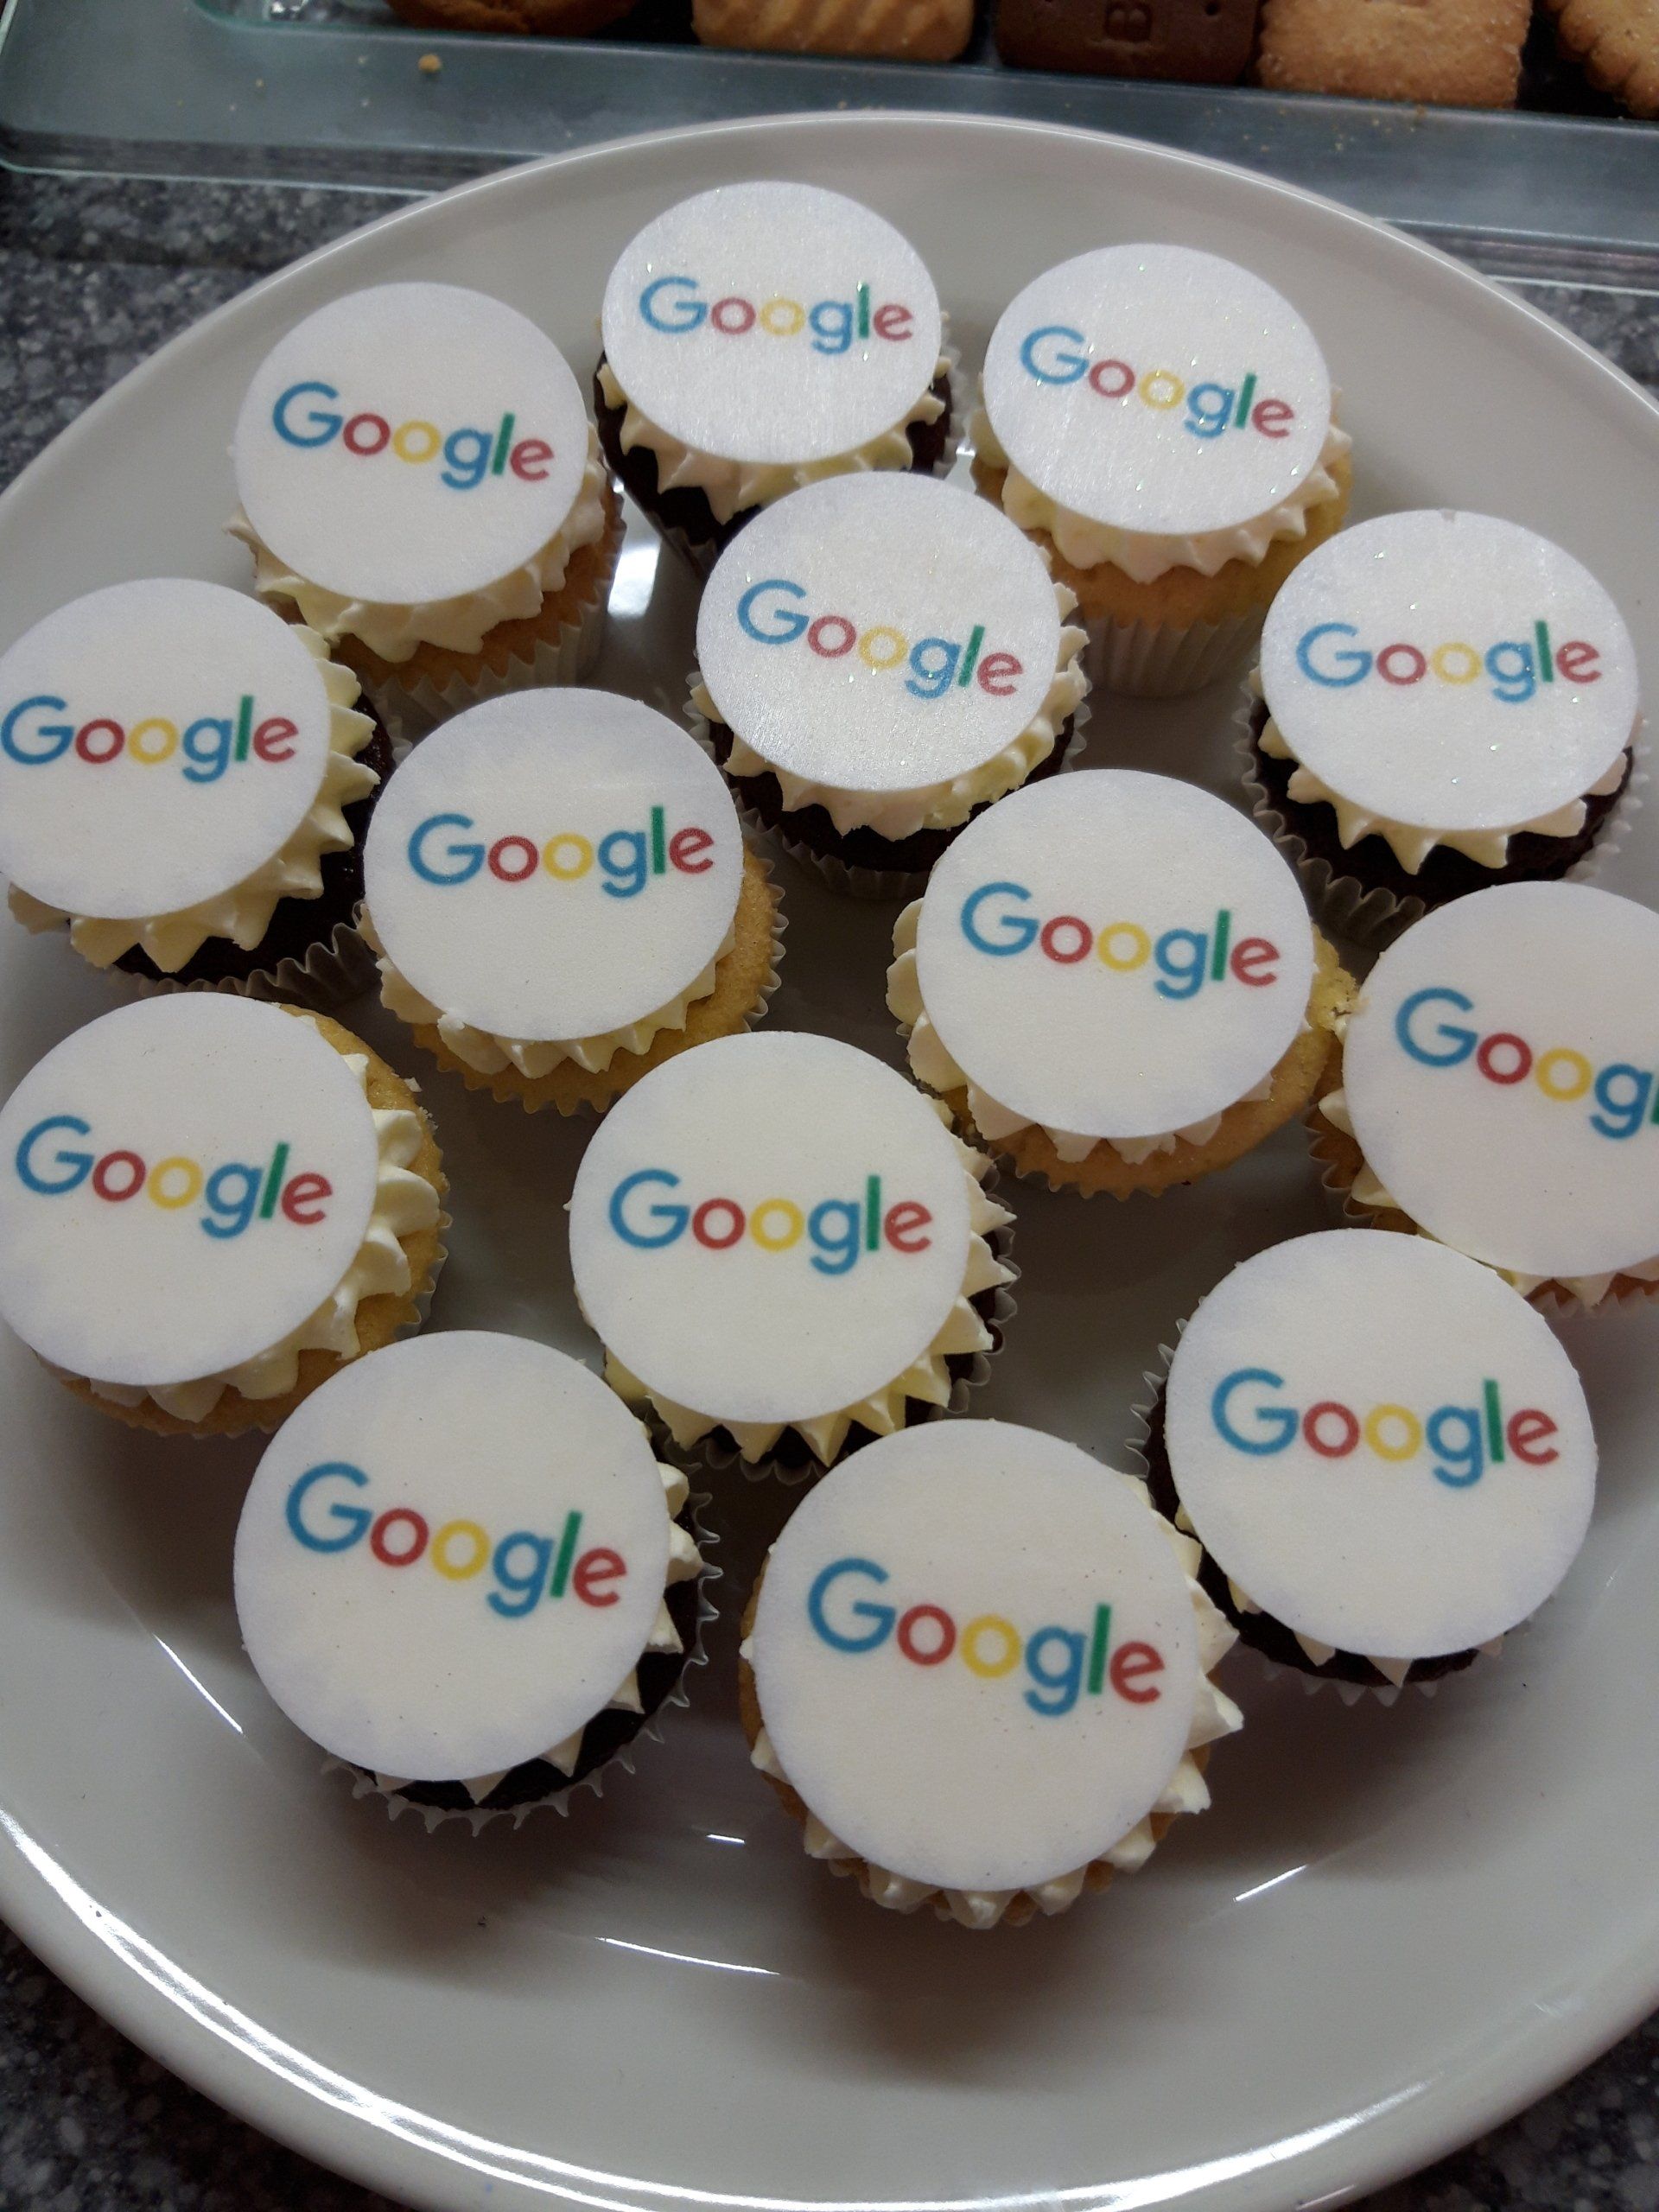 Google Digital Garage cakes from the event at North Walsham 26 October 2018